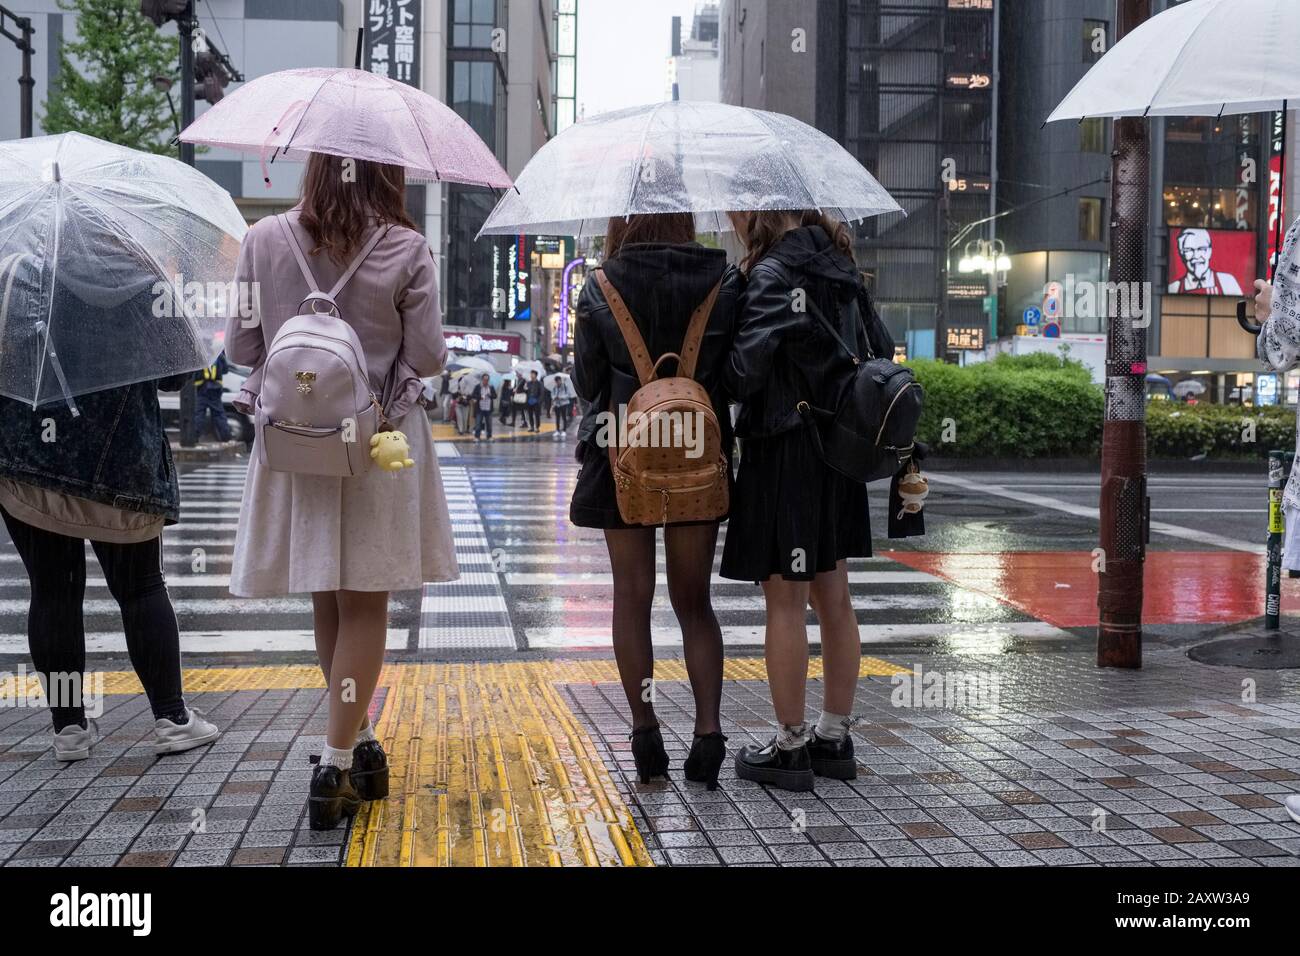 Japan, Tokyo: Japanese young girls viewed from behind waiting in front of a pedestrian crossing in Shinjuku. Japanese girls in the rain with umbrellas Stock Photo